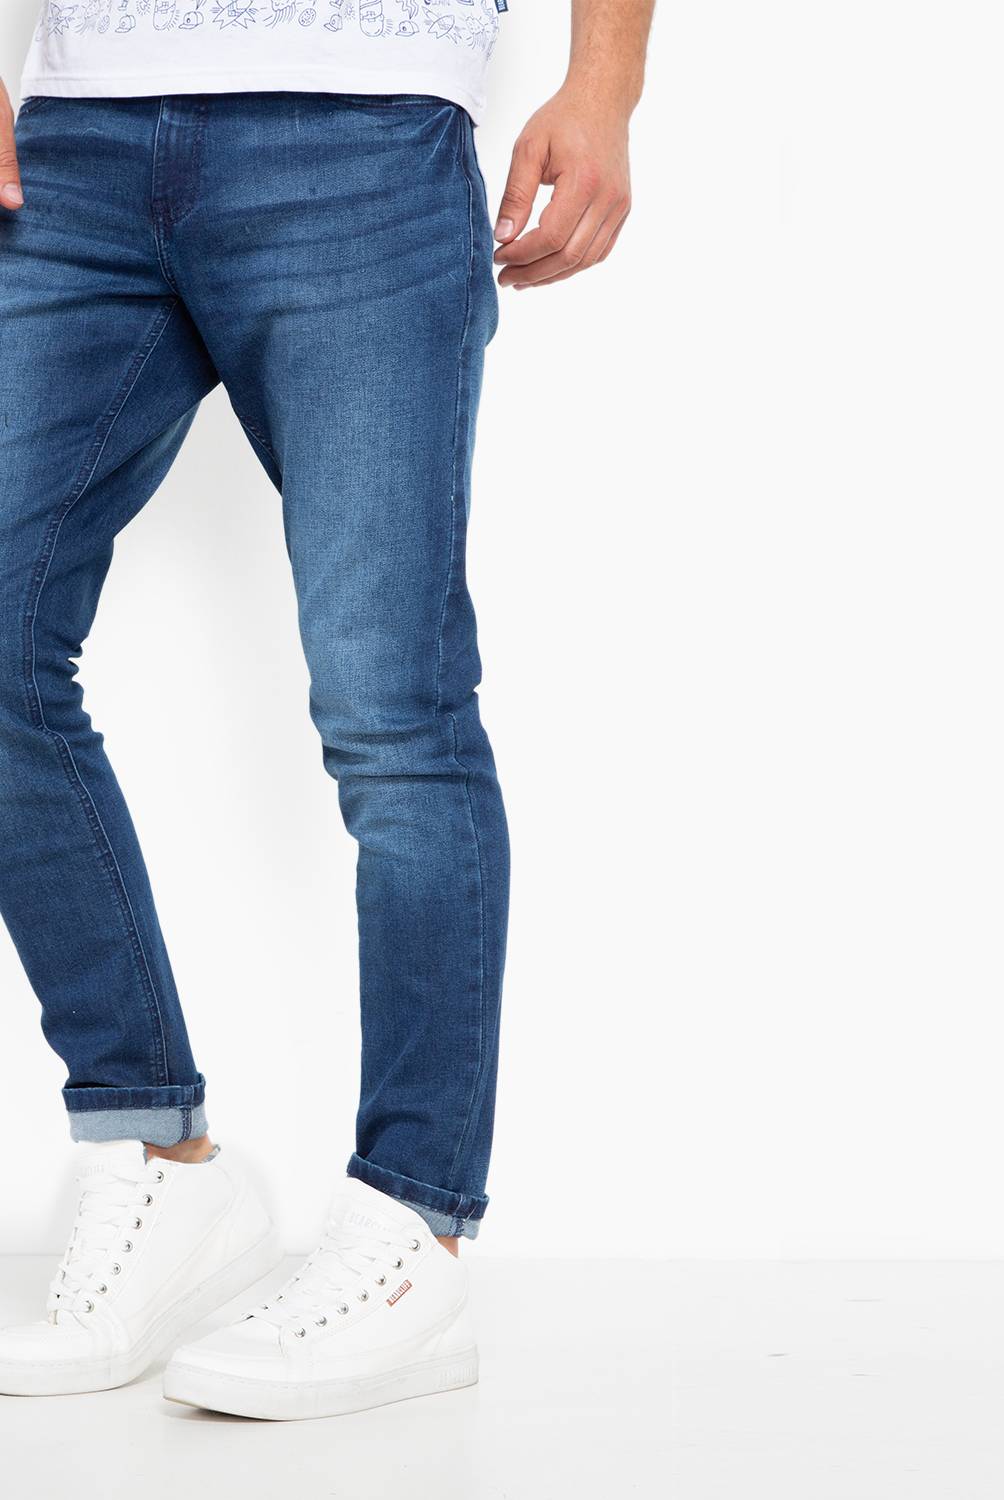 BEARCLIFF - Jeans Basico Super Skinyy Hombre Bearcliff